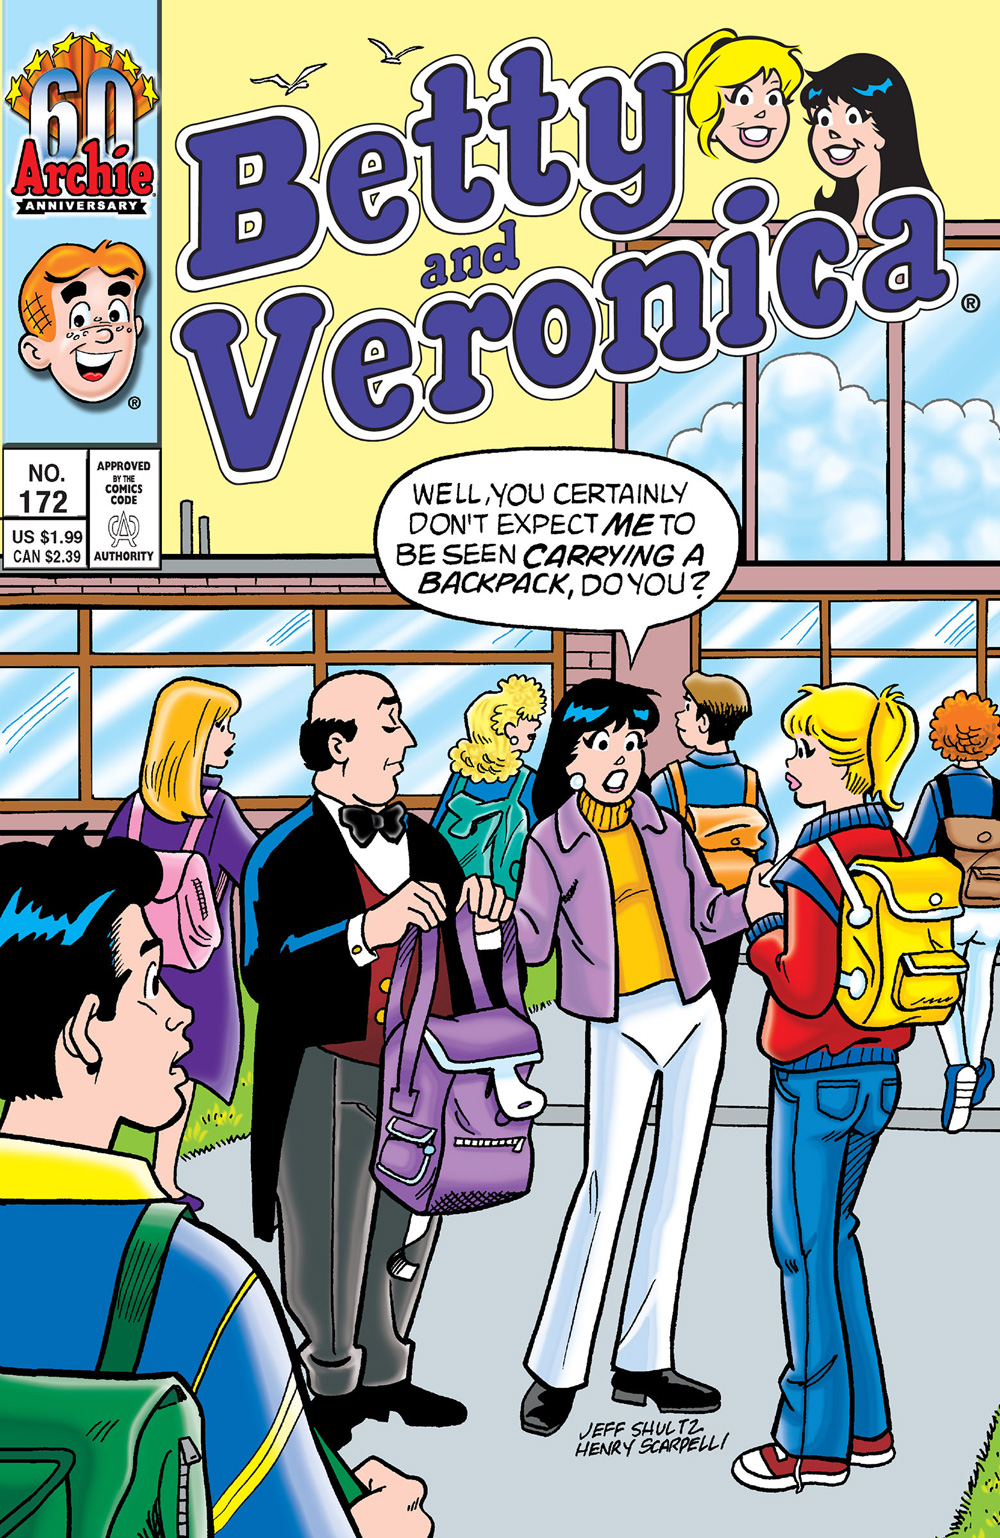 Betty and Veronica are outside of school, with a crowd of kids behind them going inside. Smithers is standing there holding Veronica's backpack. She says she can't be seen carrying her own backpack.